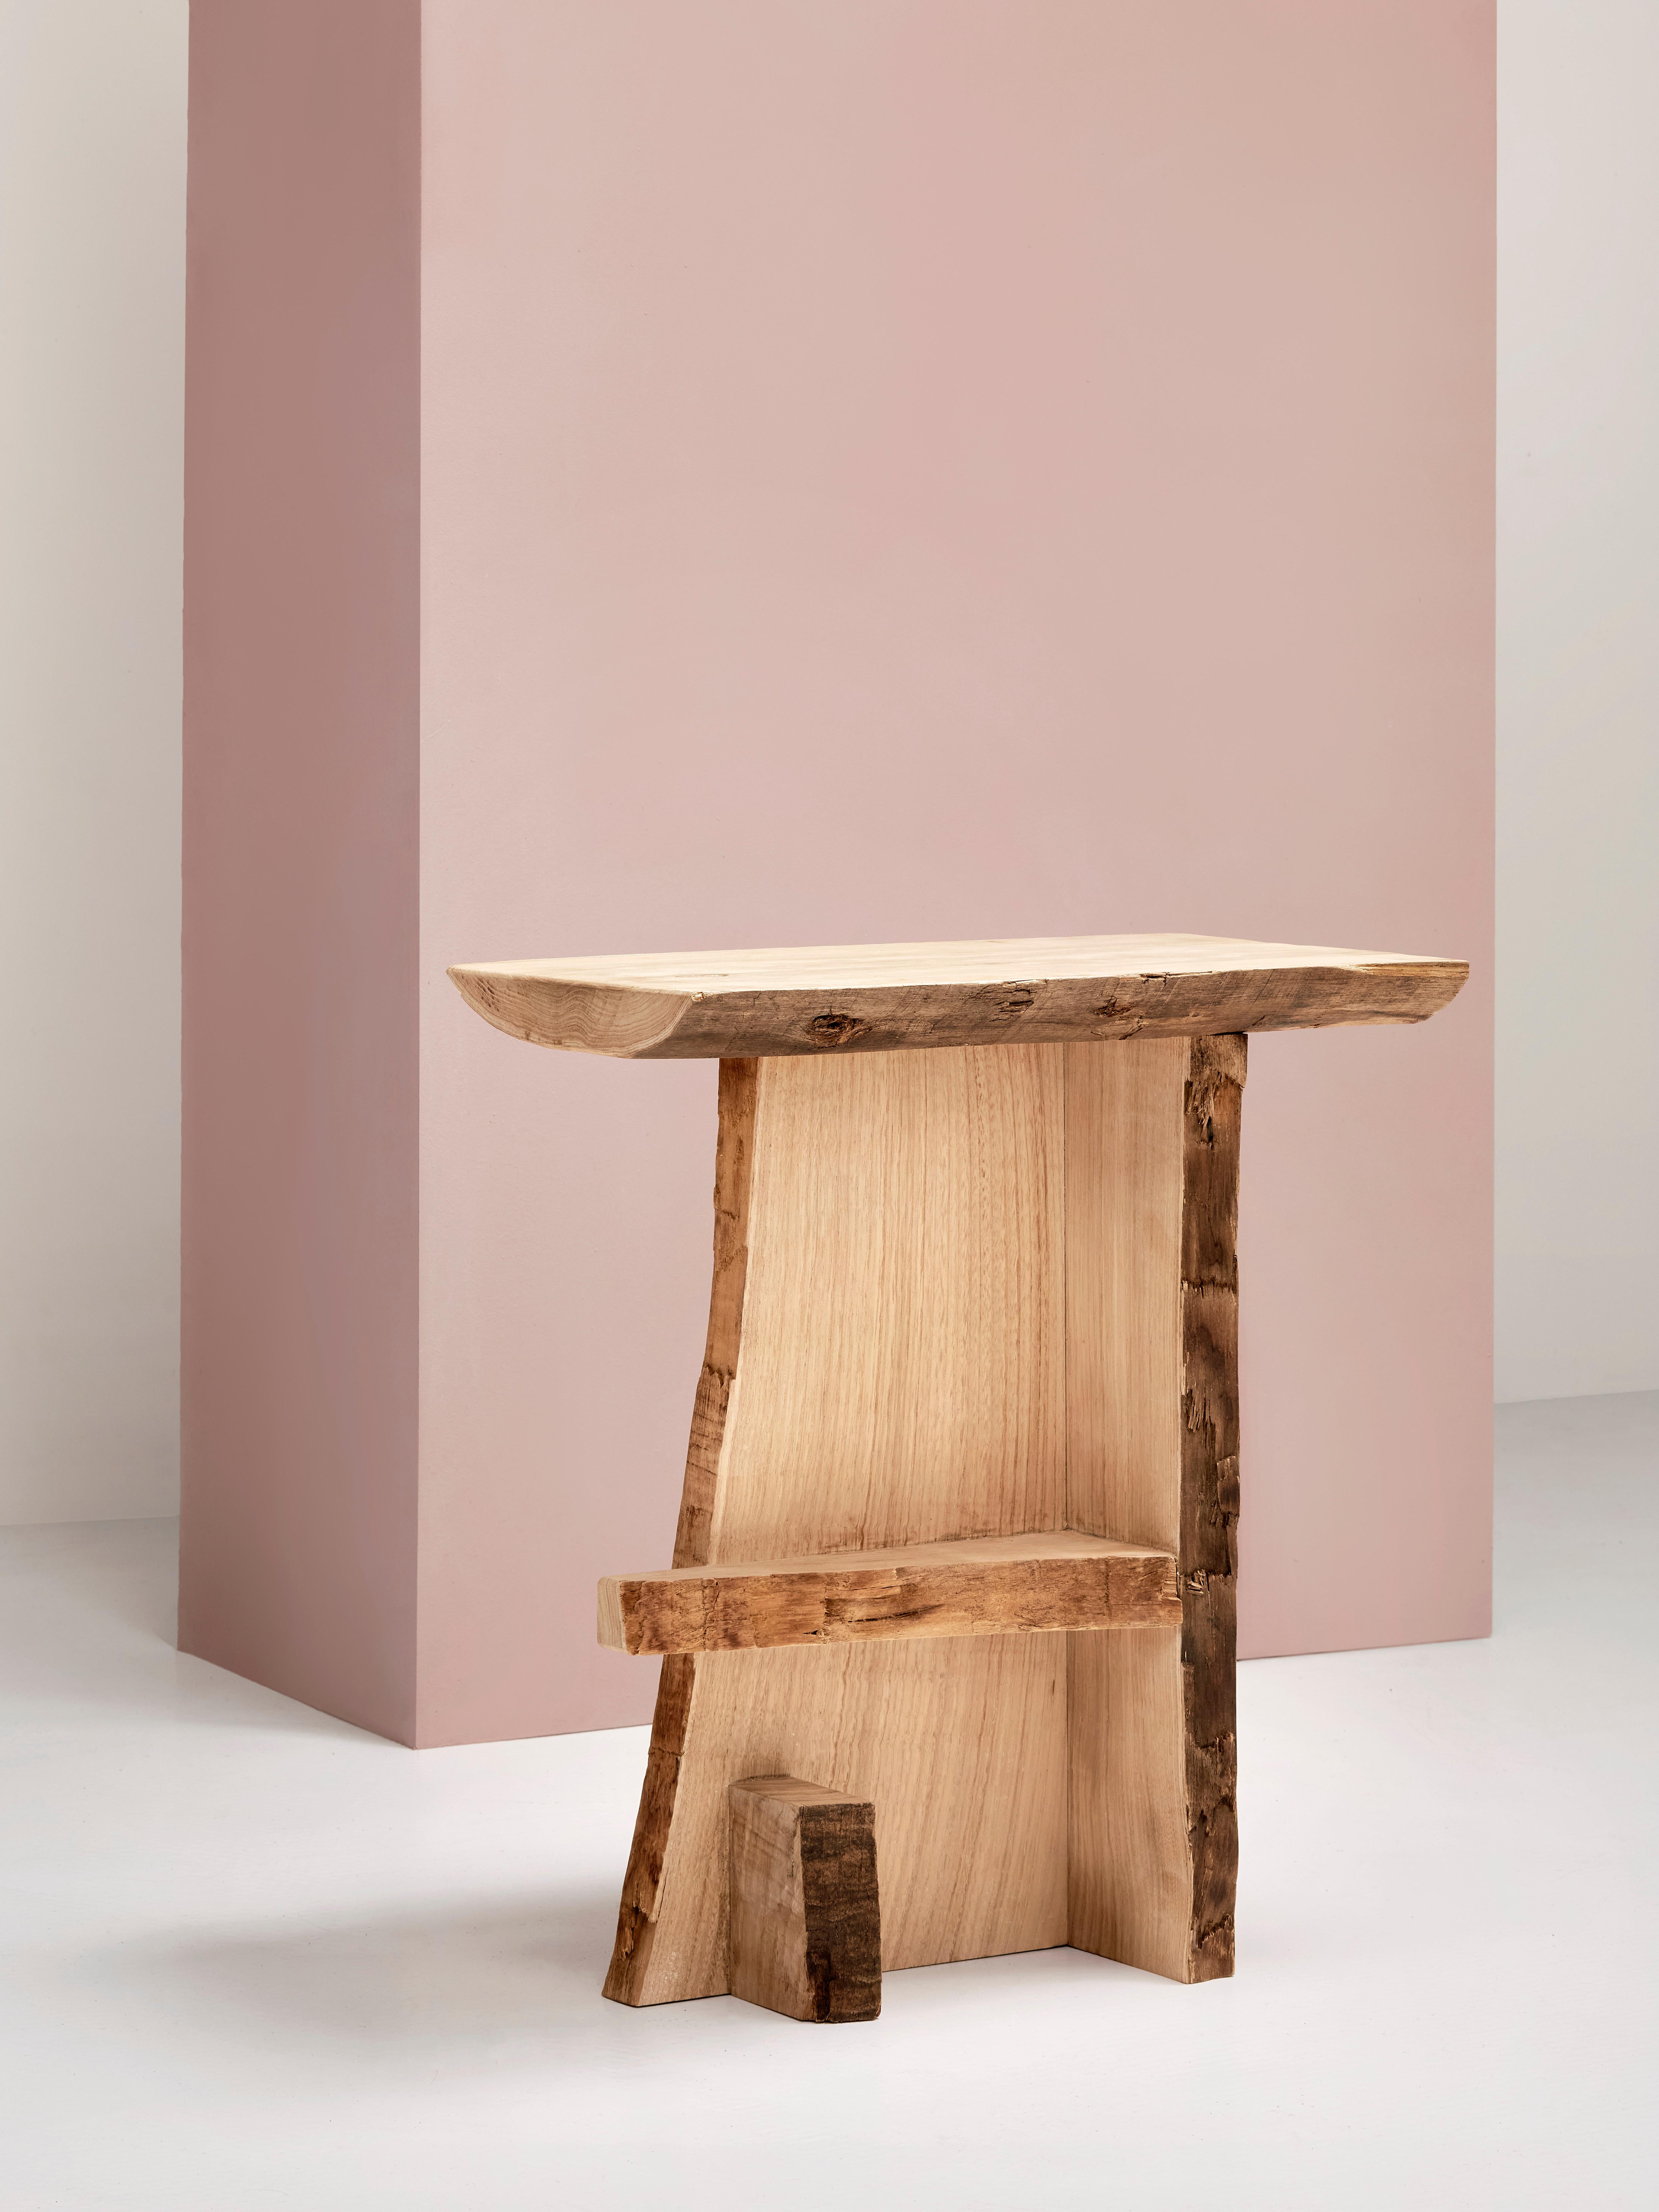 Ripped Wood Table by Willem Van Hooff
Handmade
Dimensions: W 38 x H 68 cm (Dimensions may vary as pieces are hand-made and might present slight variations in sizes)
Materials: Wood.


Willem van Hooff is a designer based in Eindhoven.
He is a driven